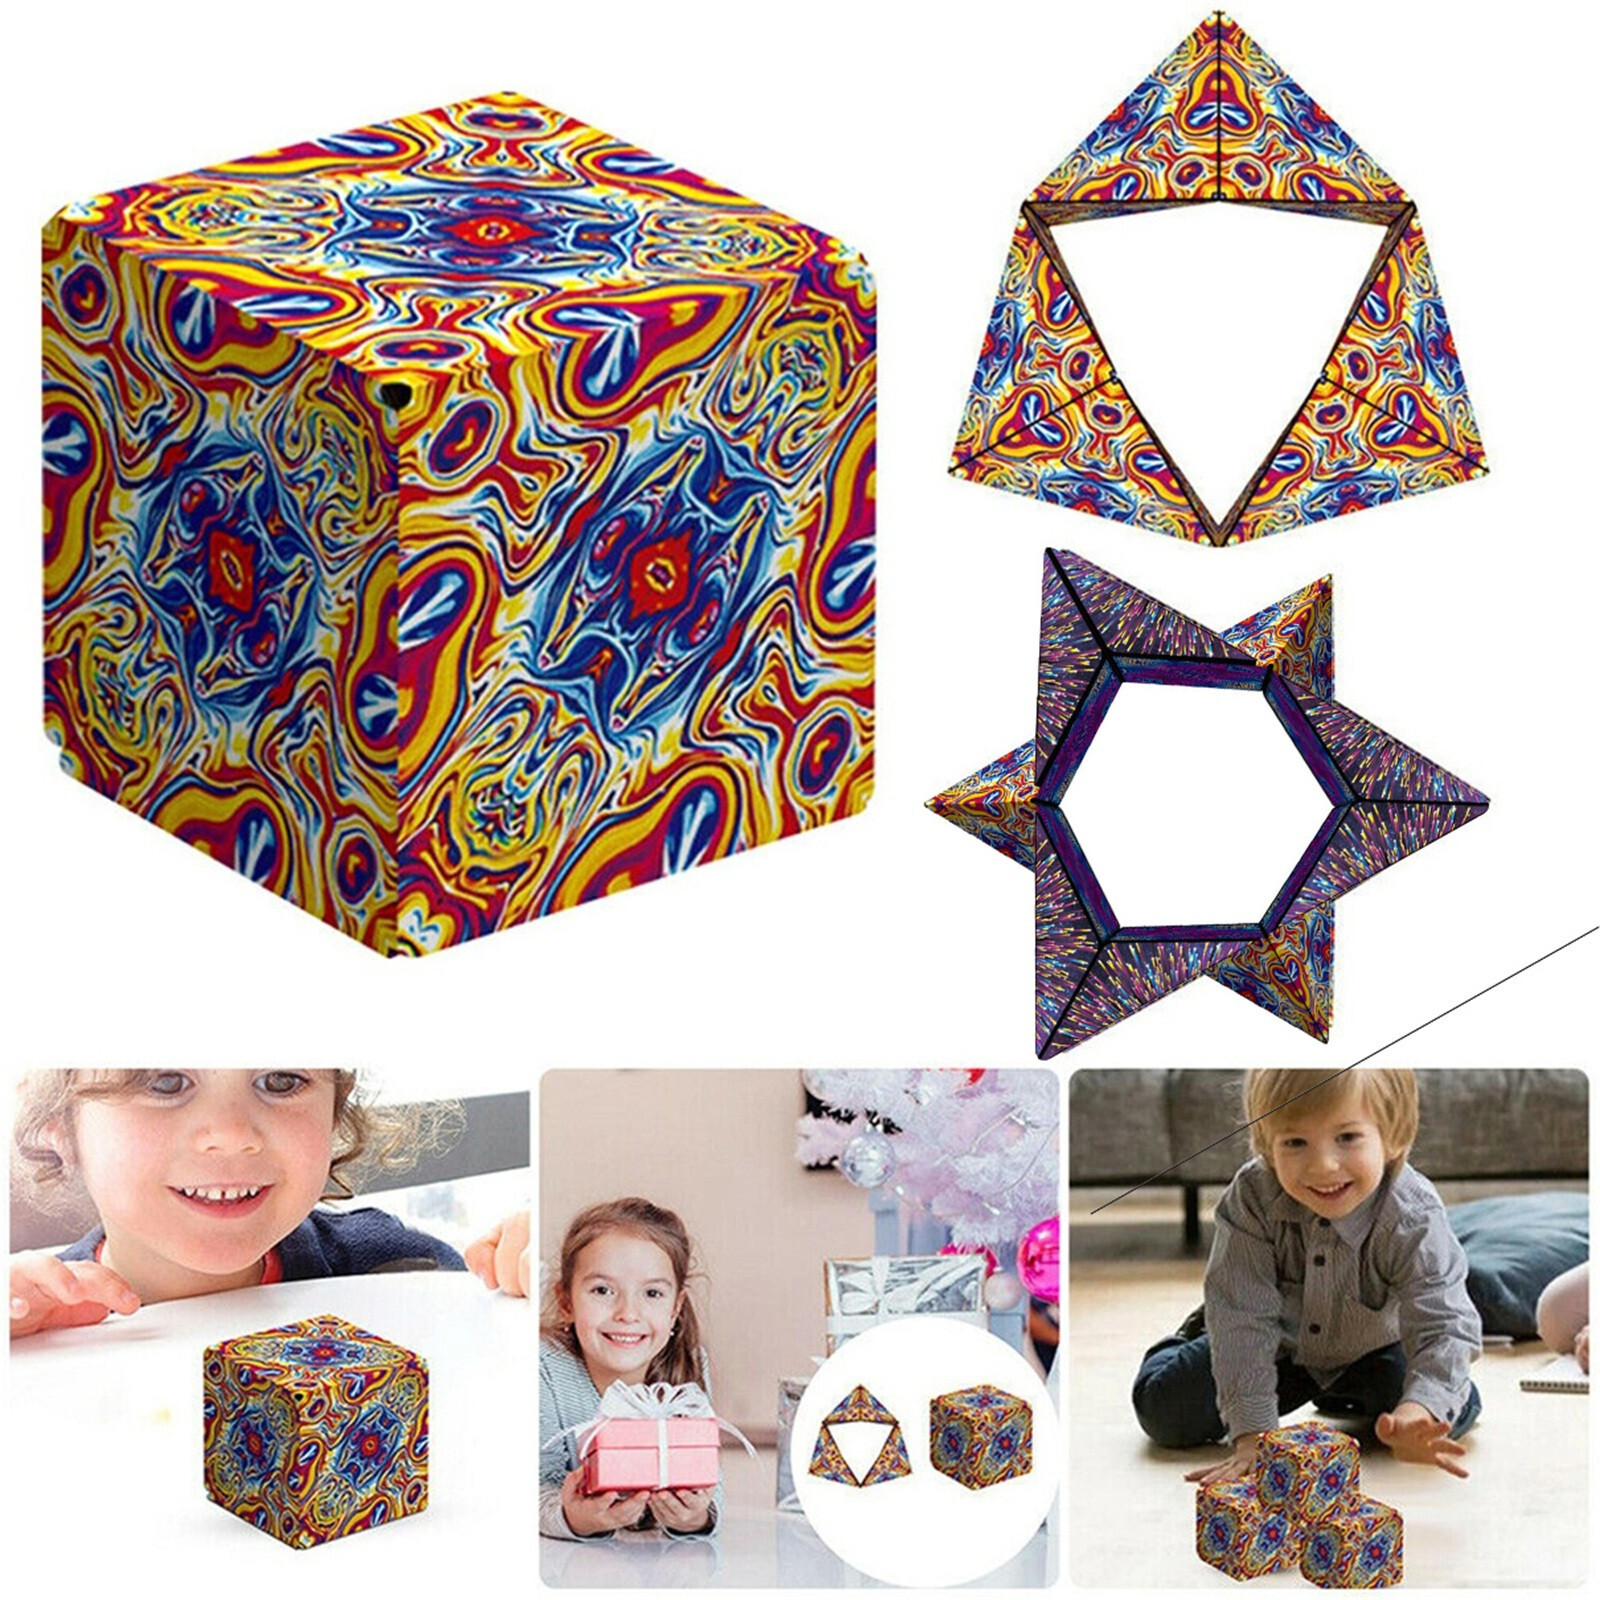 SALES 50% OFF-- Fizz Changeable Magnetic Magic Cube🔥